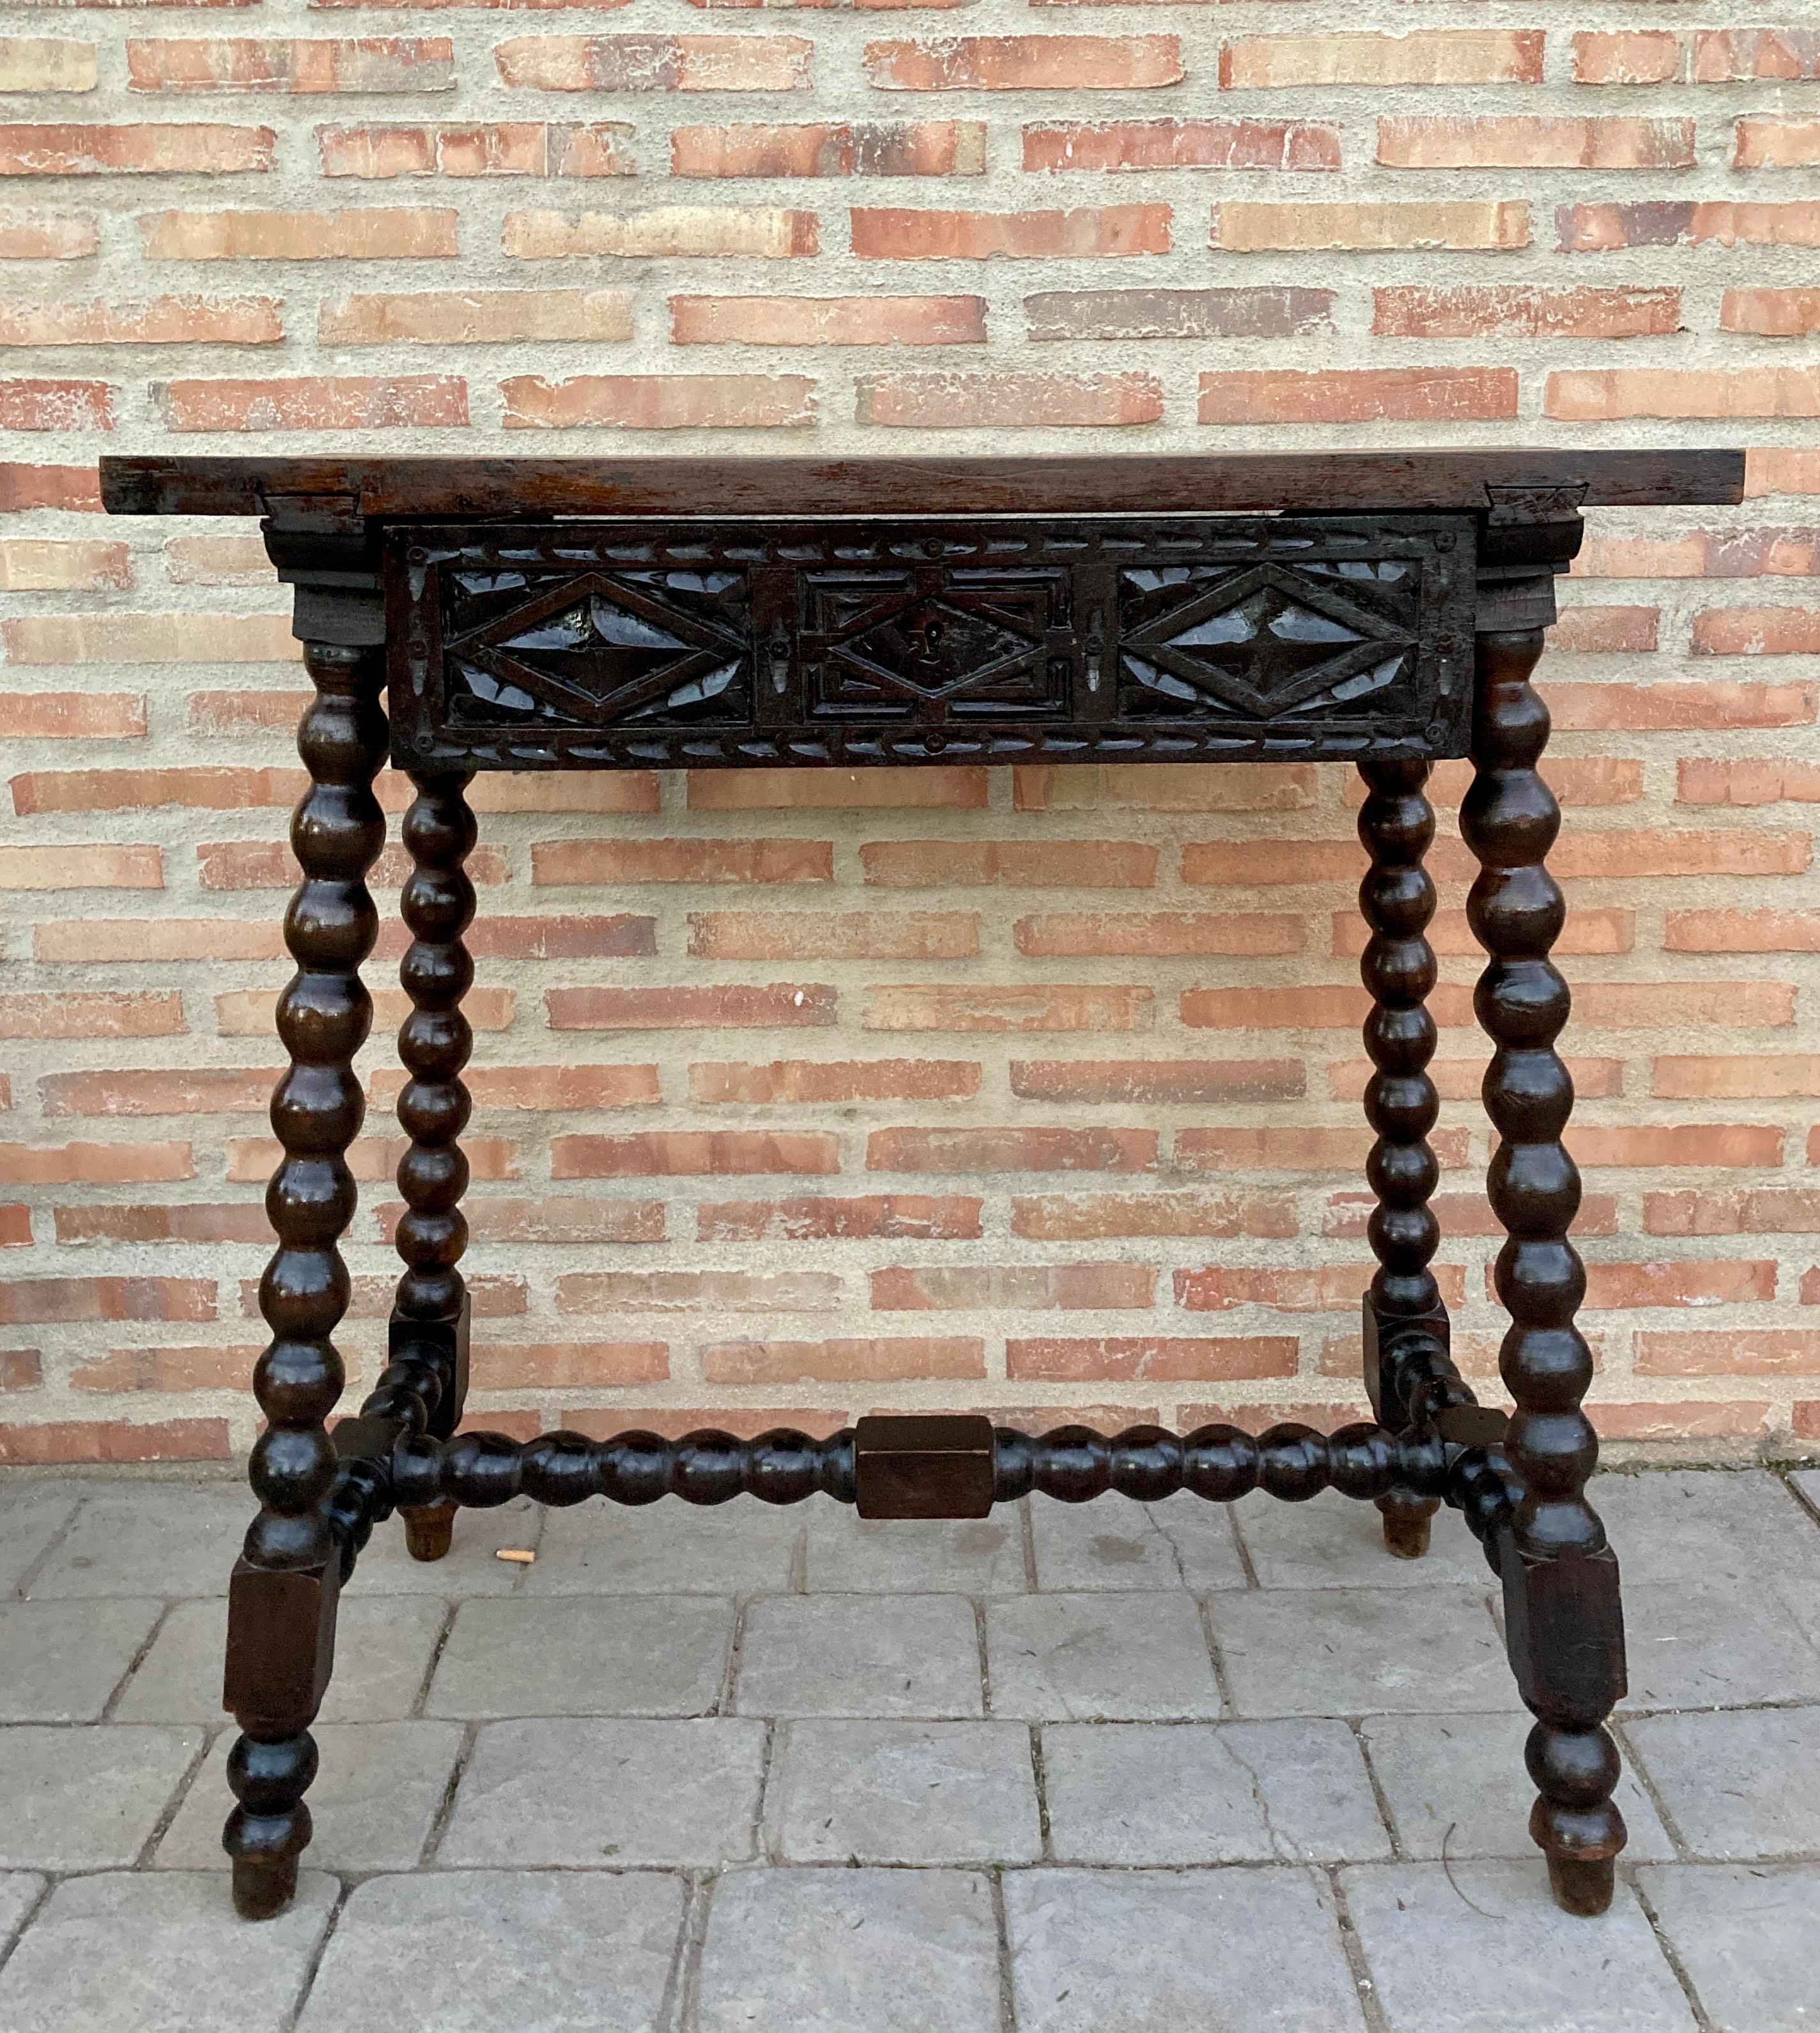 19th century Spanish walnut side table with turned legs, flat top with a lockable drawer and turned wood frame.
Side table of walnut with turned legs and flat top. Spanish, the legs are connected by an original turned wood stretcher, 19th